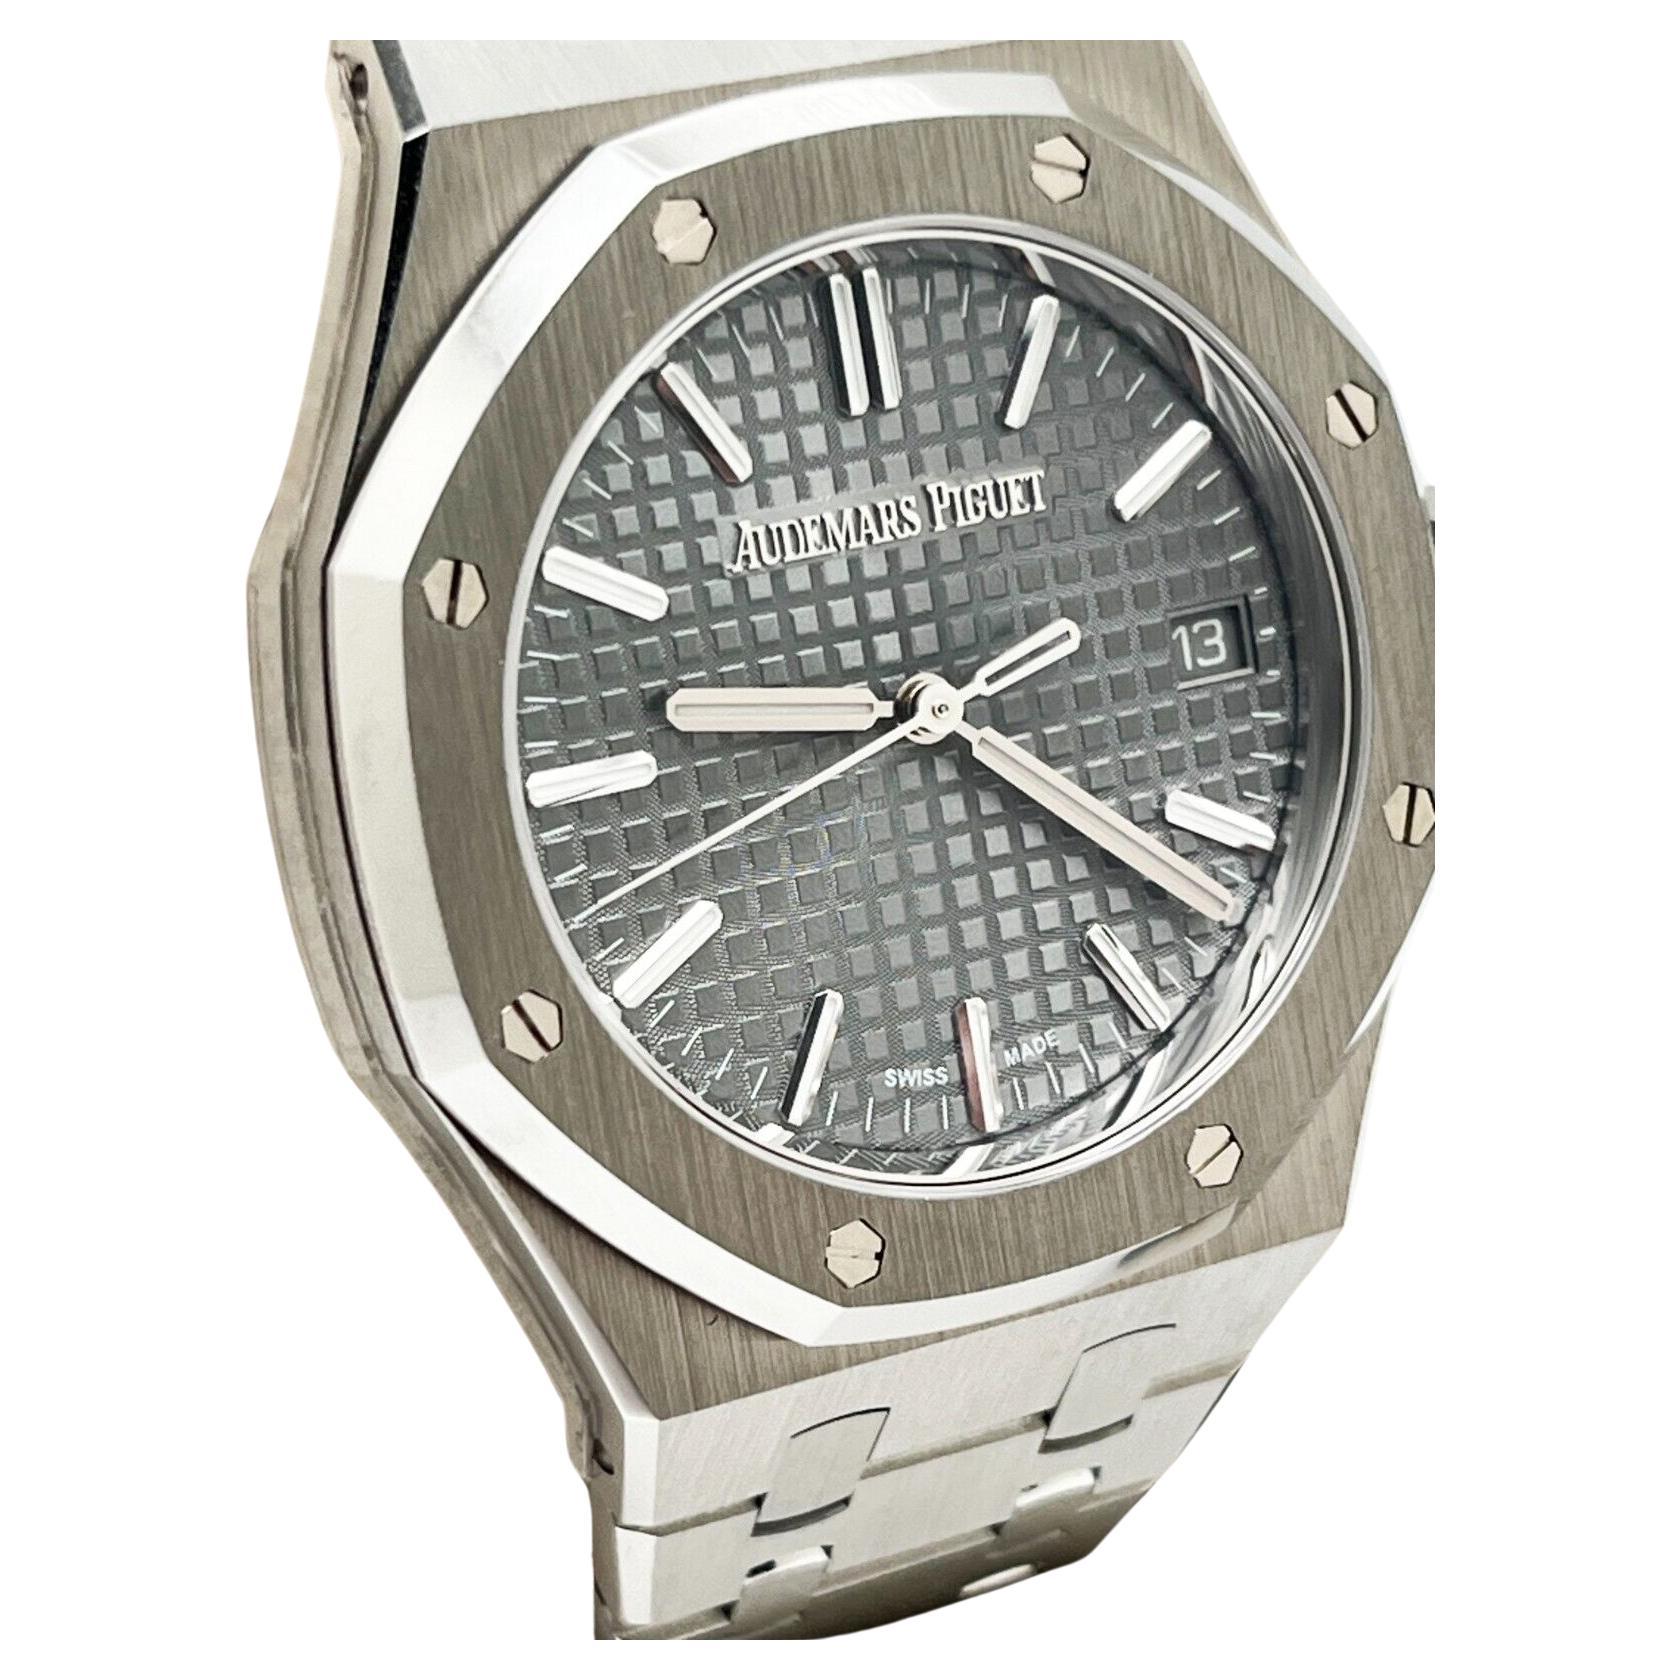 Audemars Piguet 15550ST.OO.1356ST.03 Grey Dial Stainless Steel Box Paper For Sale